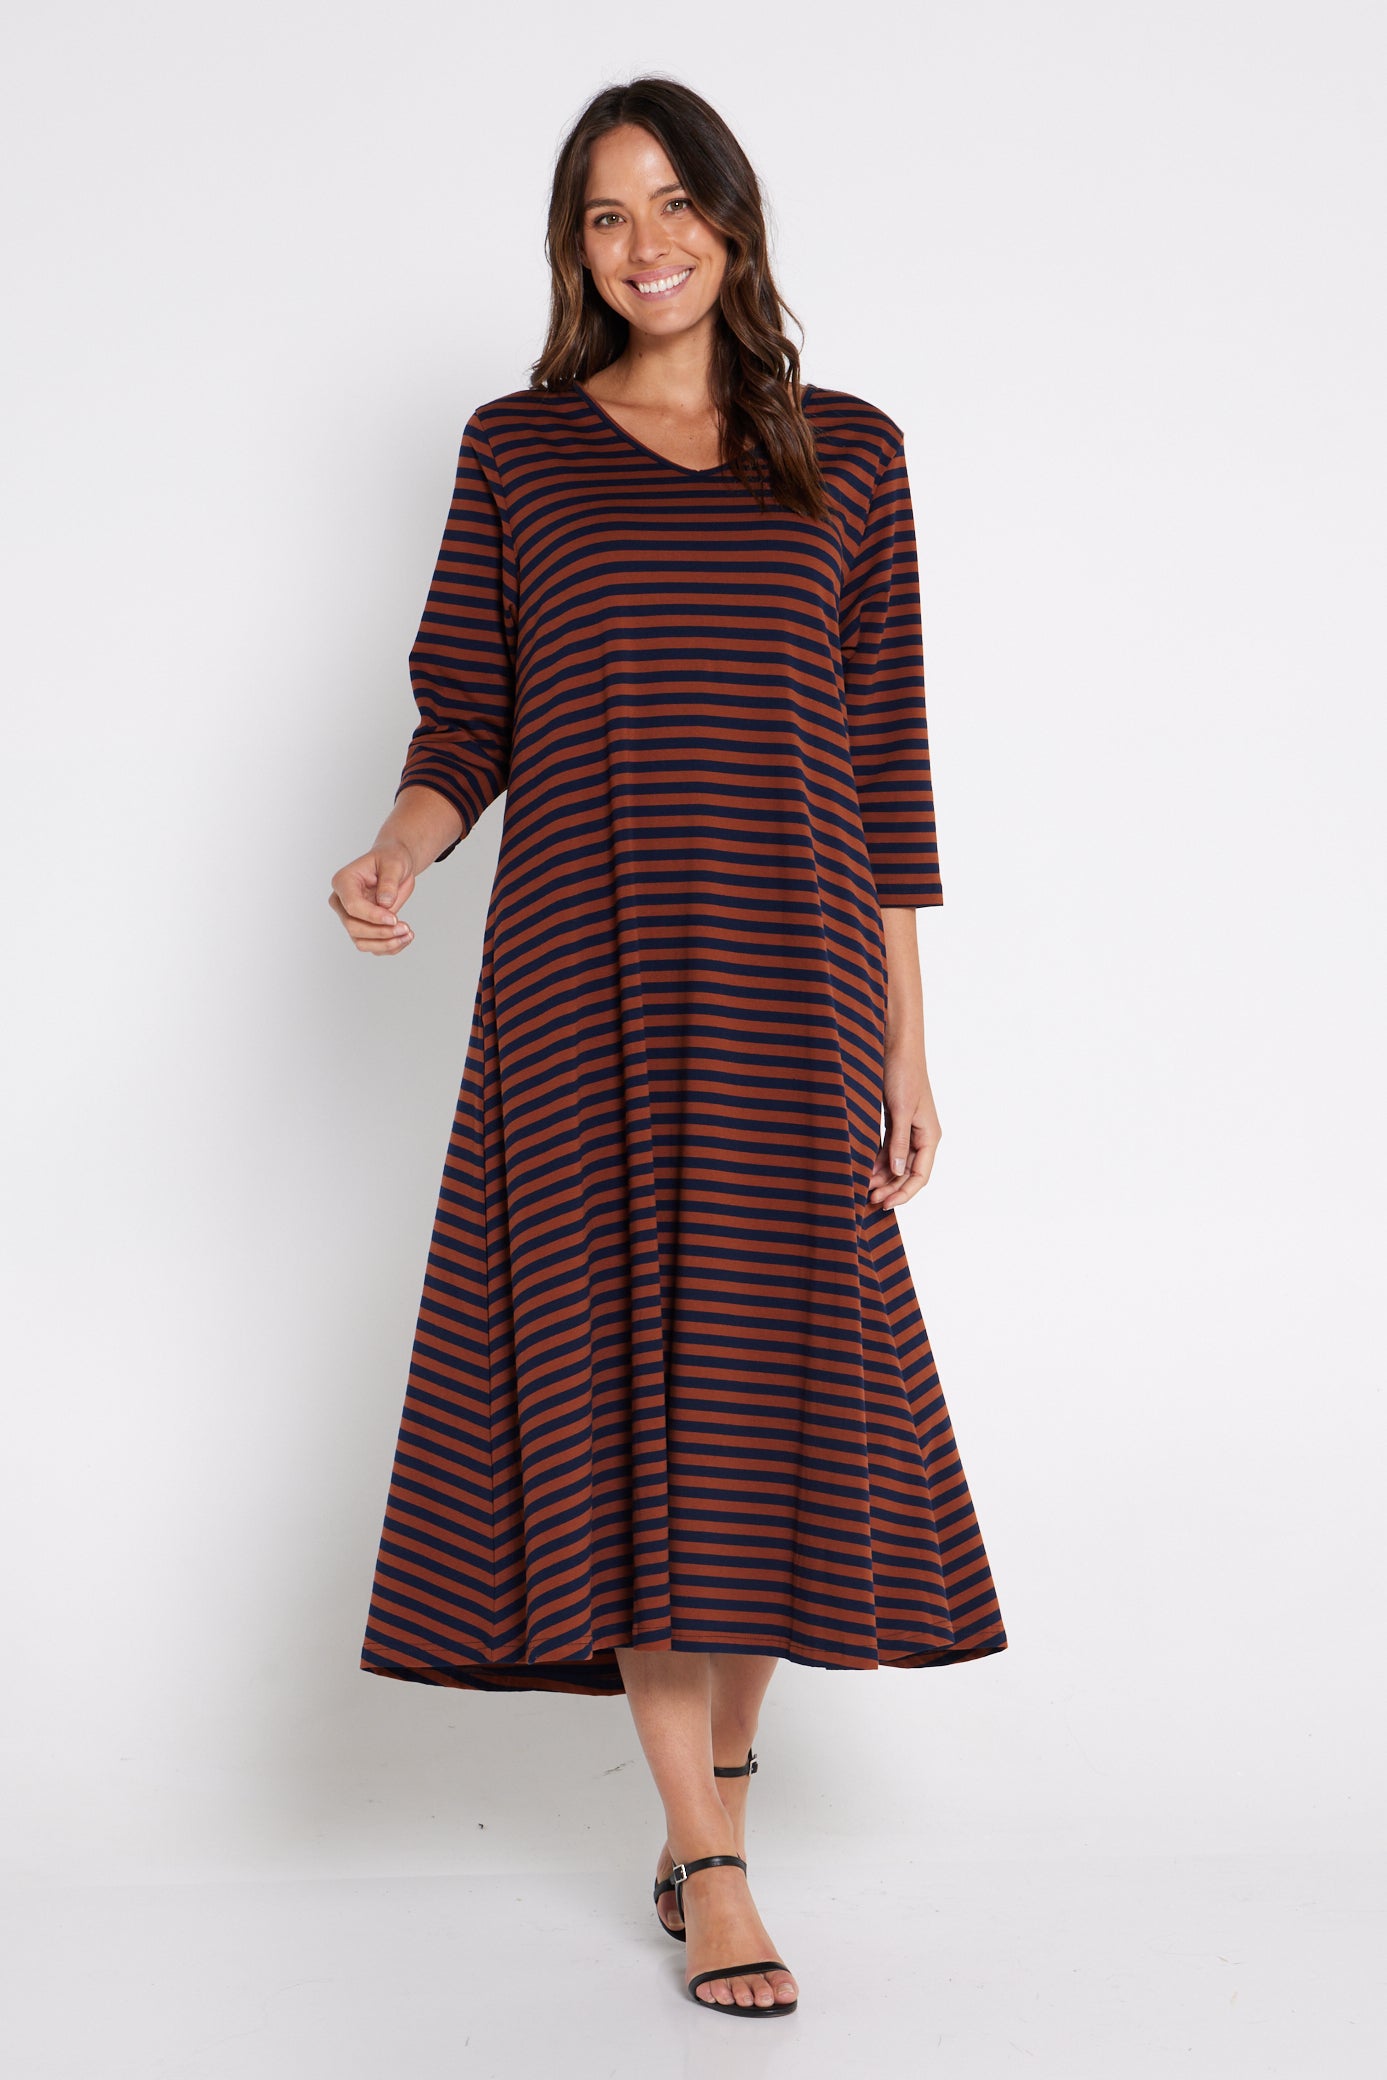 Midi Dresses: Chic Timeless Style - AVAH